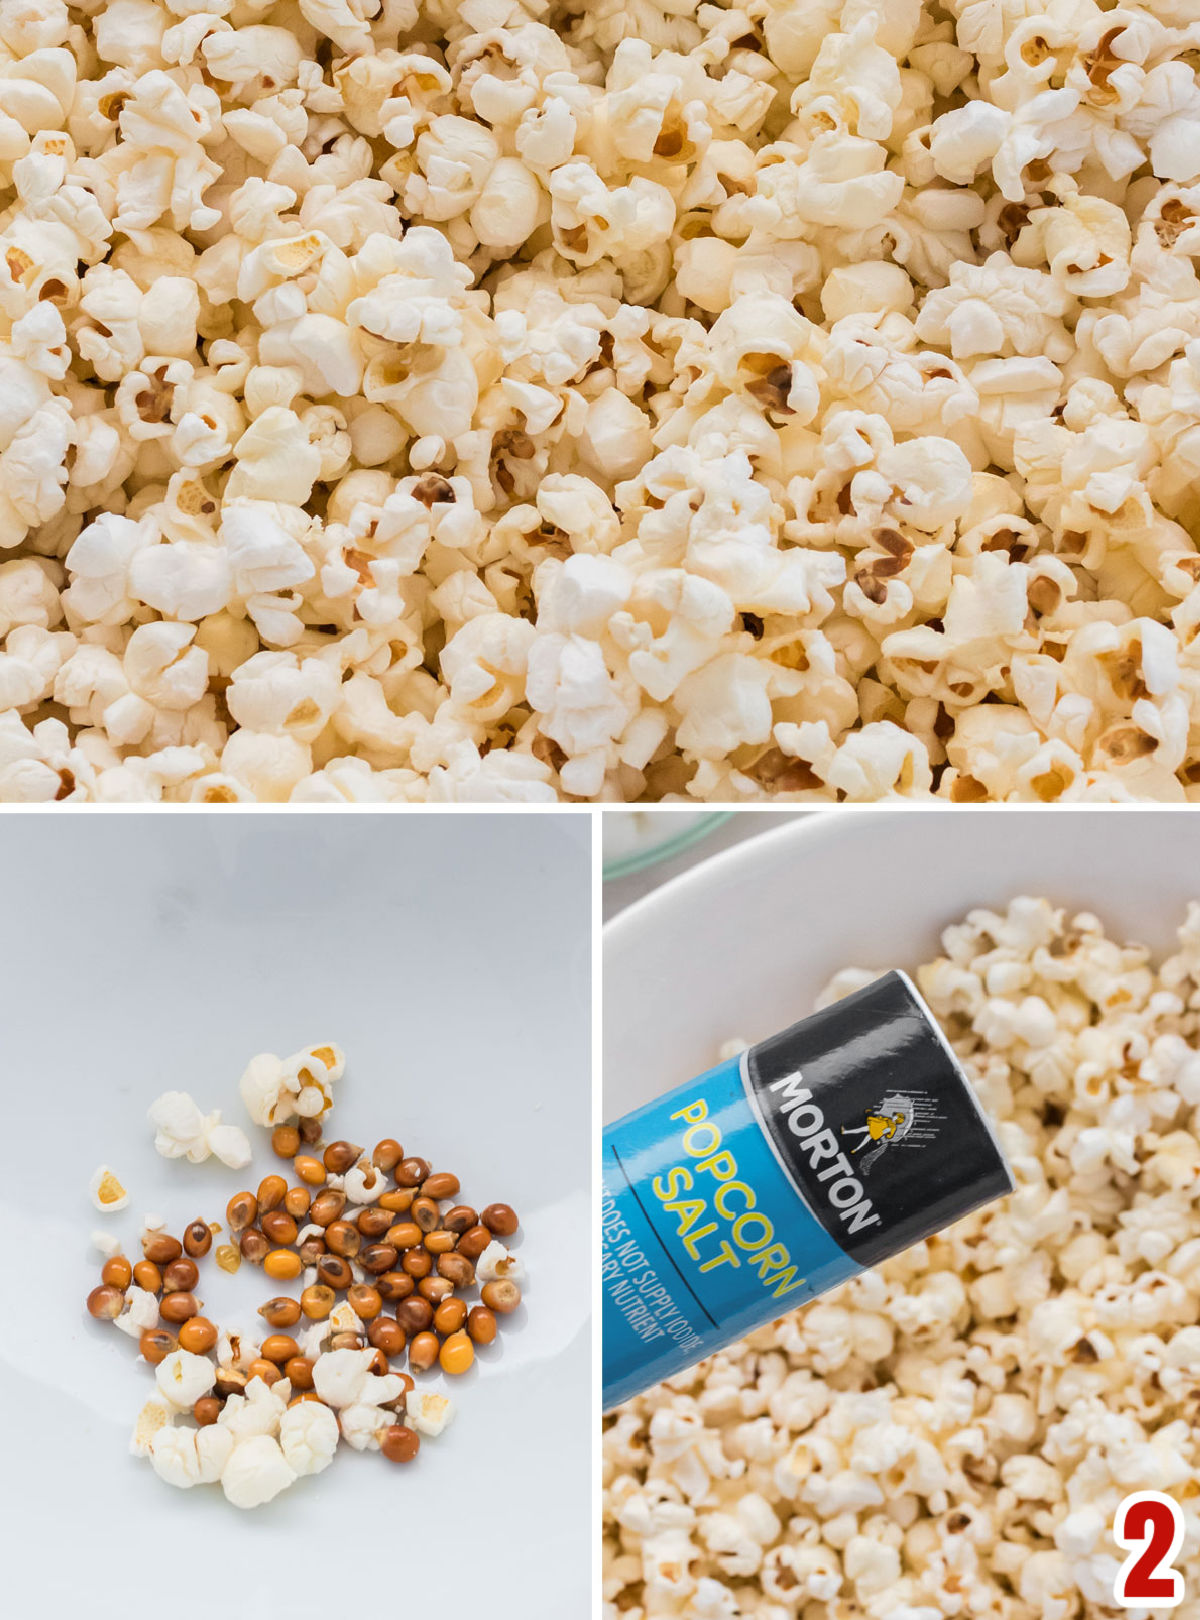 Collage image showing the steps to make homemade popcorn.